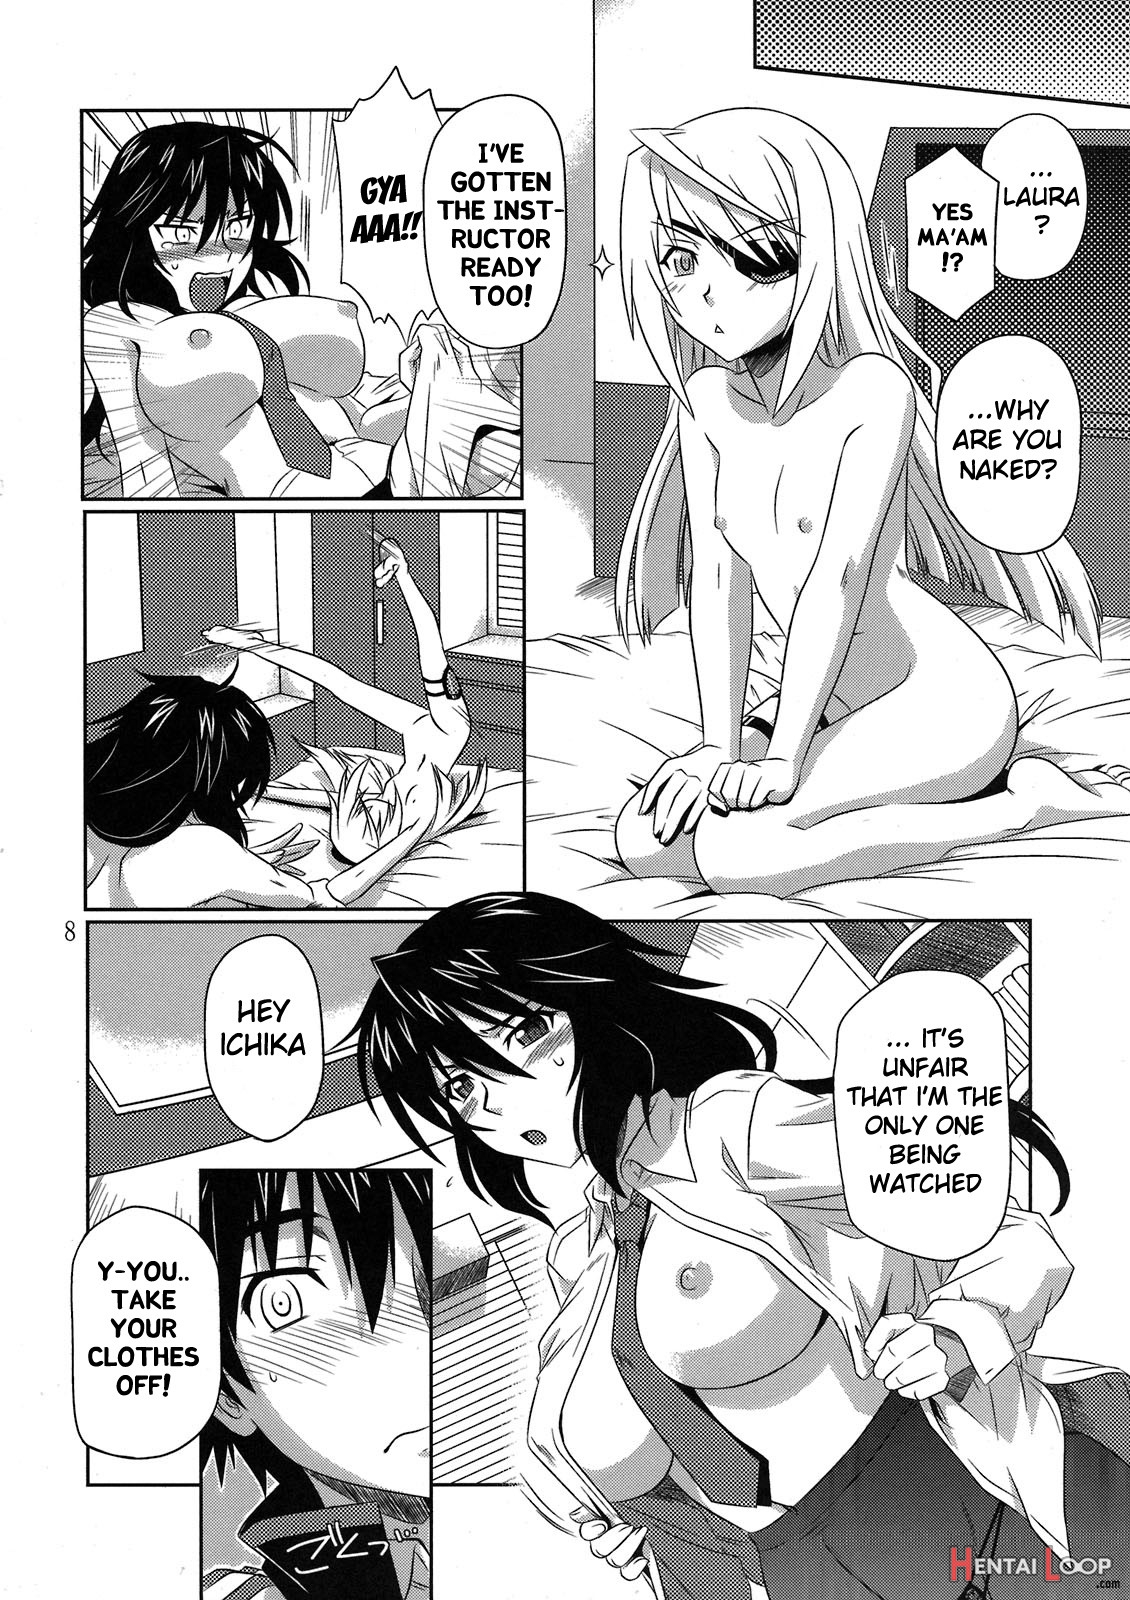 Incest Strategy page 8